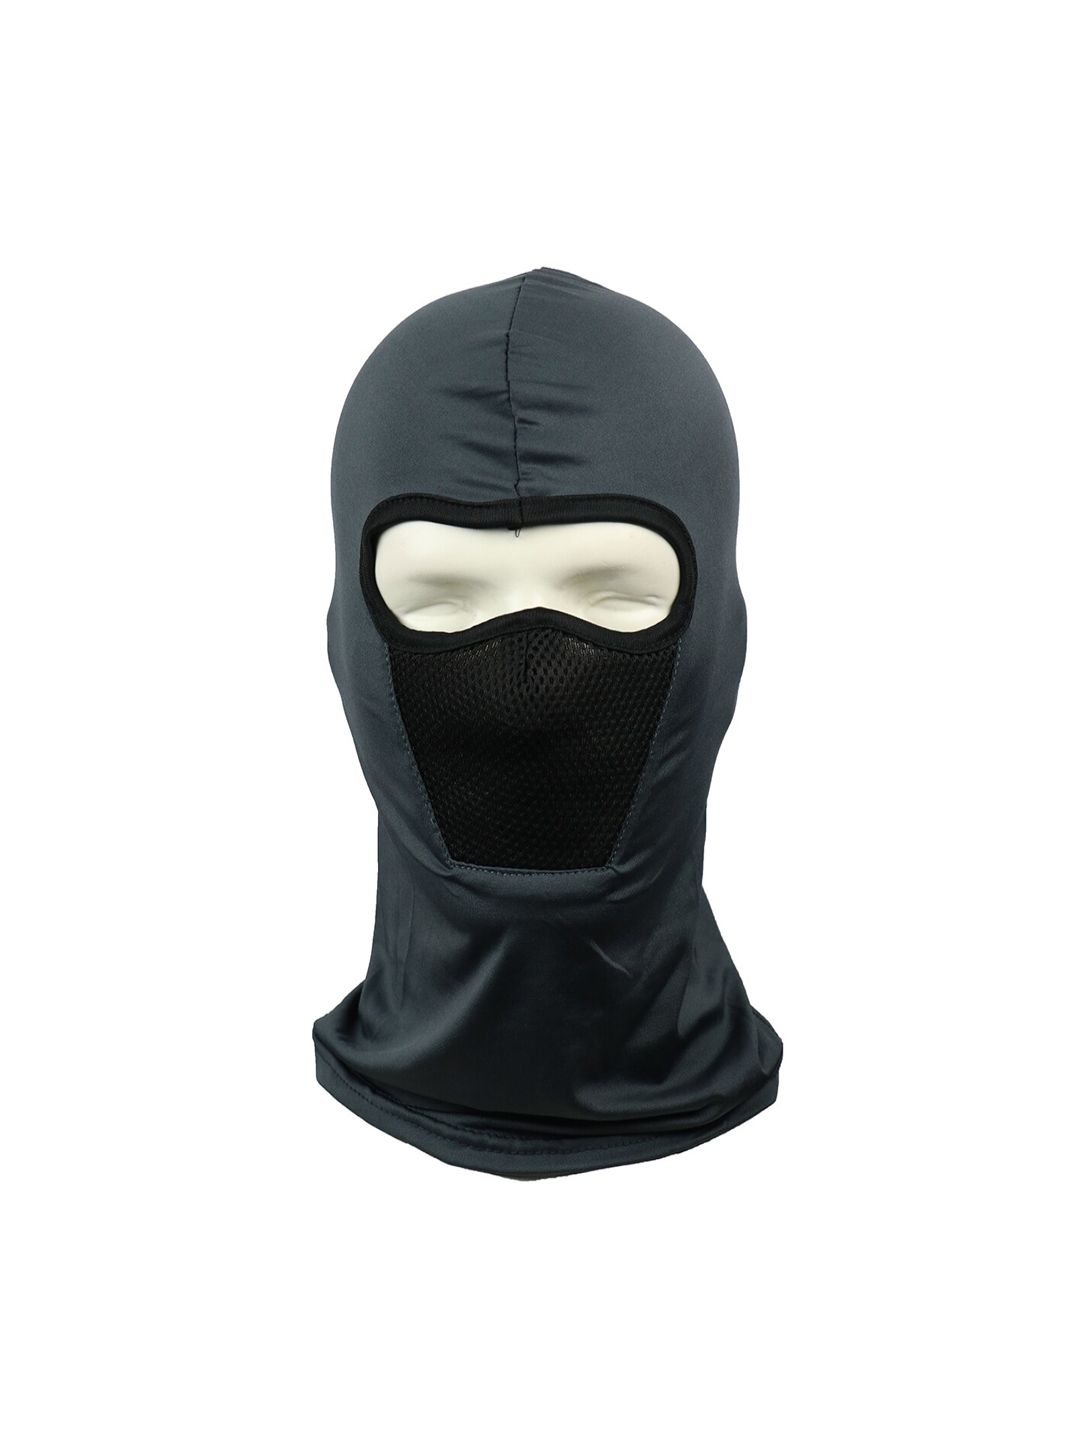 iSWEVEN Unisex Grey Solid Balaclava Mask Price in India